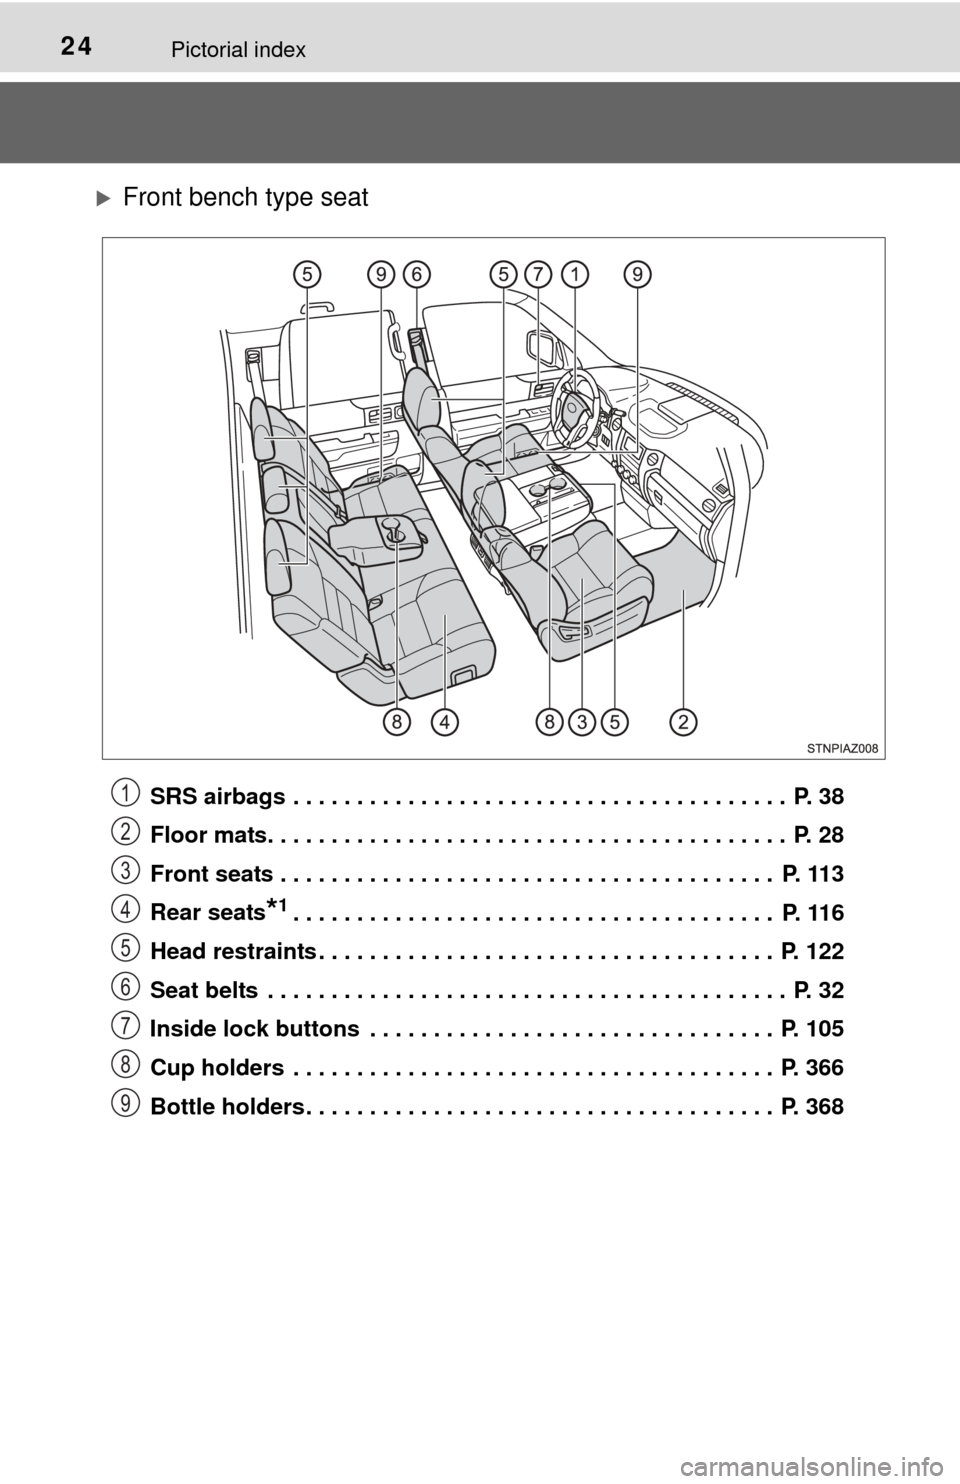 TOYOTA TUNDRA 2014 2.G Owners Manual 24Pictorial index
Front bench type seat
SRS airbags  . . . . . . . . . . . . . . . . . . . . . . . . . . . . . . . . . . . . . . .  P. 38
Floor mats. . . . . . . . . . . . . . . . . . . . . . . . .